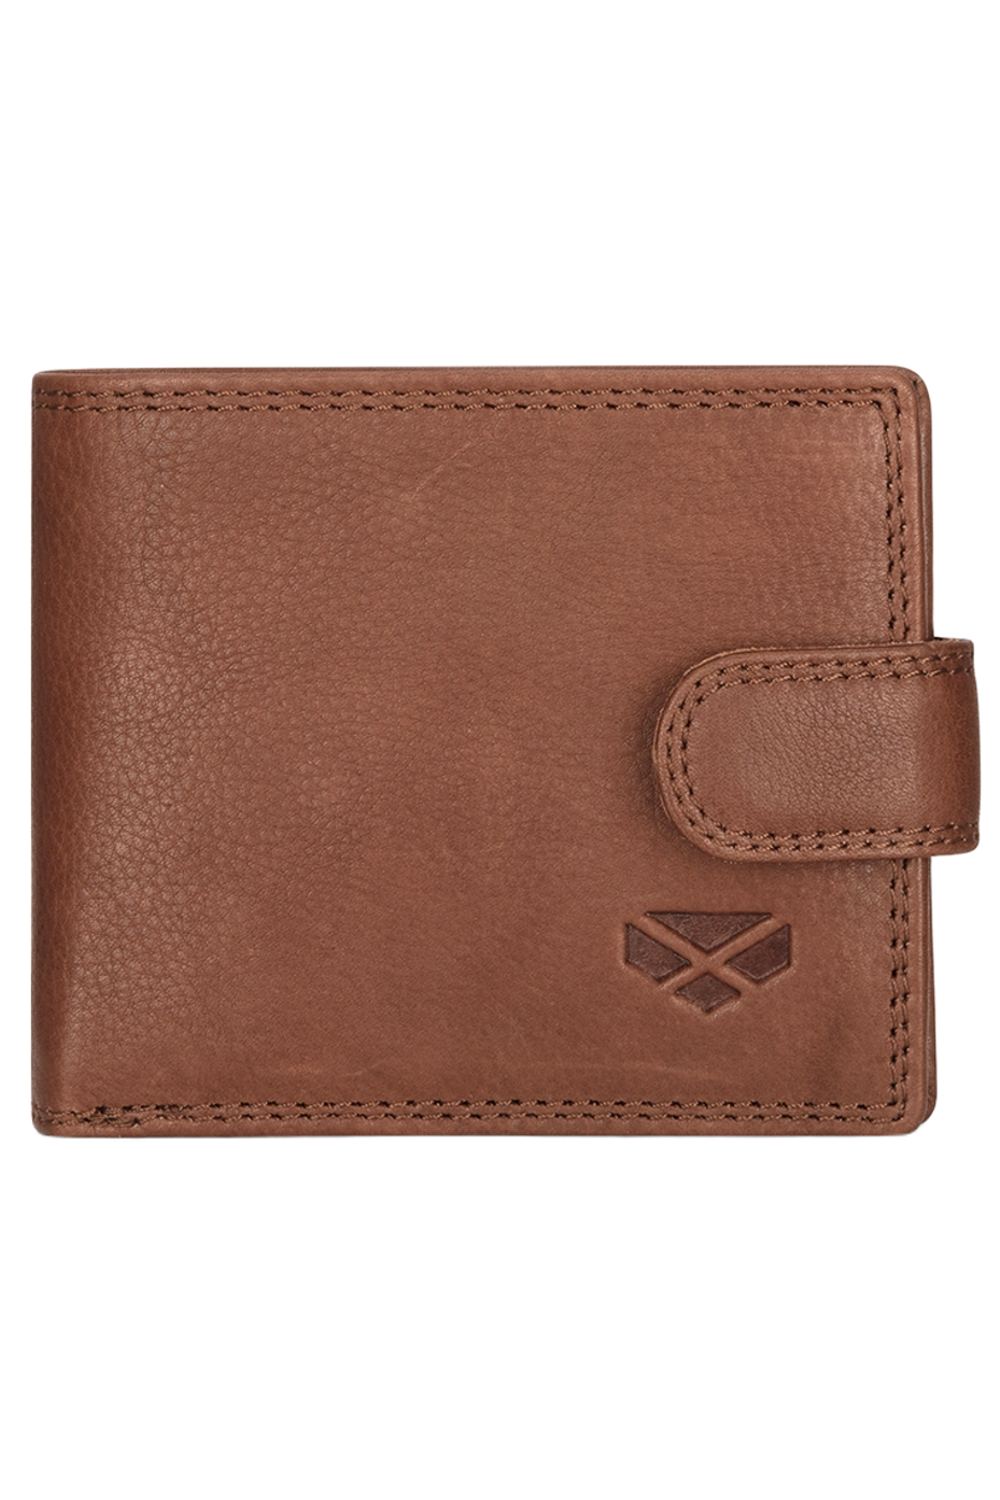 Hoggs of Fife Monarch Leather Coin Wallet with Tab in Hazelnut 